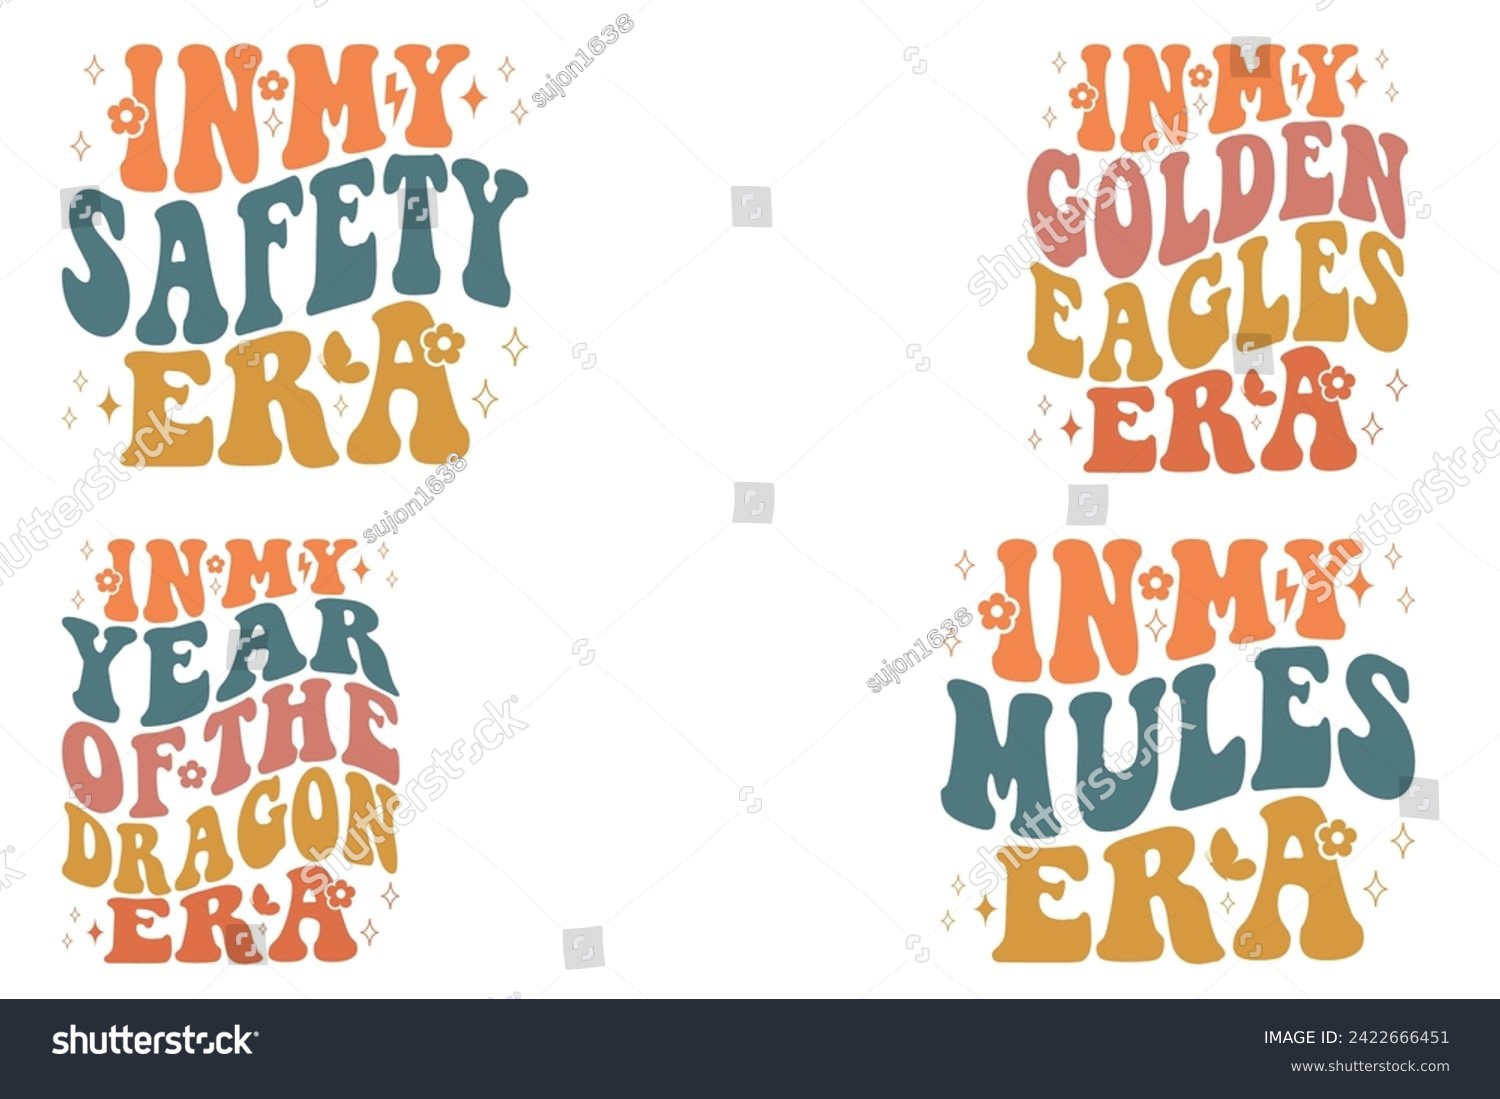 SVG of In My Safety Era, In My Golden Eagles Era, In My Year of the Dragon Era, In My Mules Era retro t-shirt svg